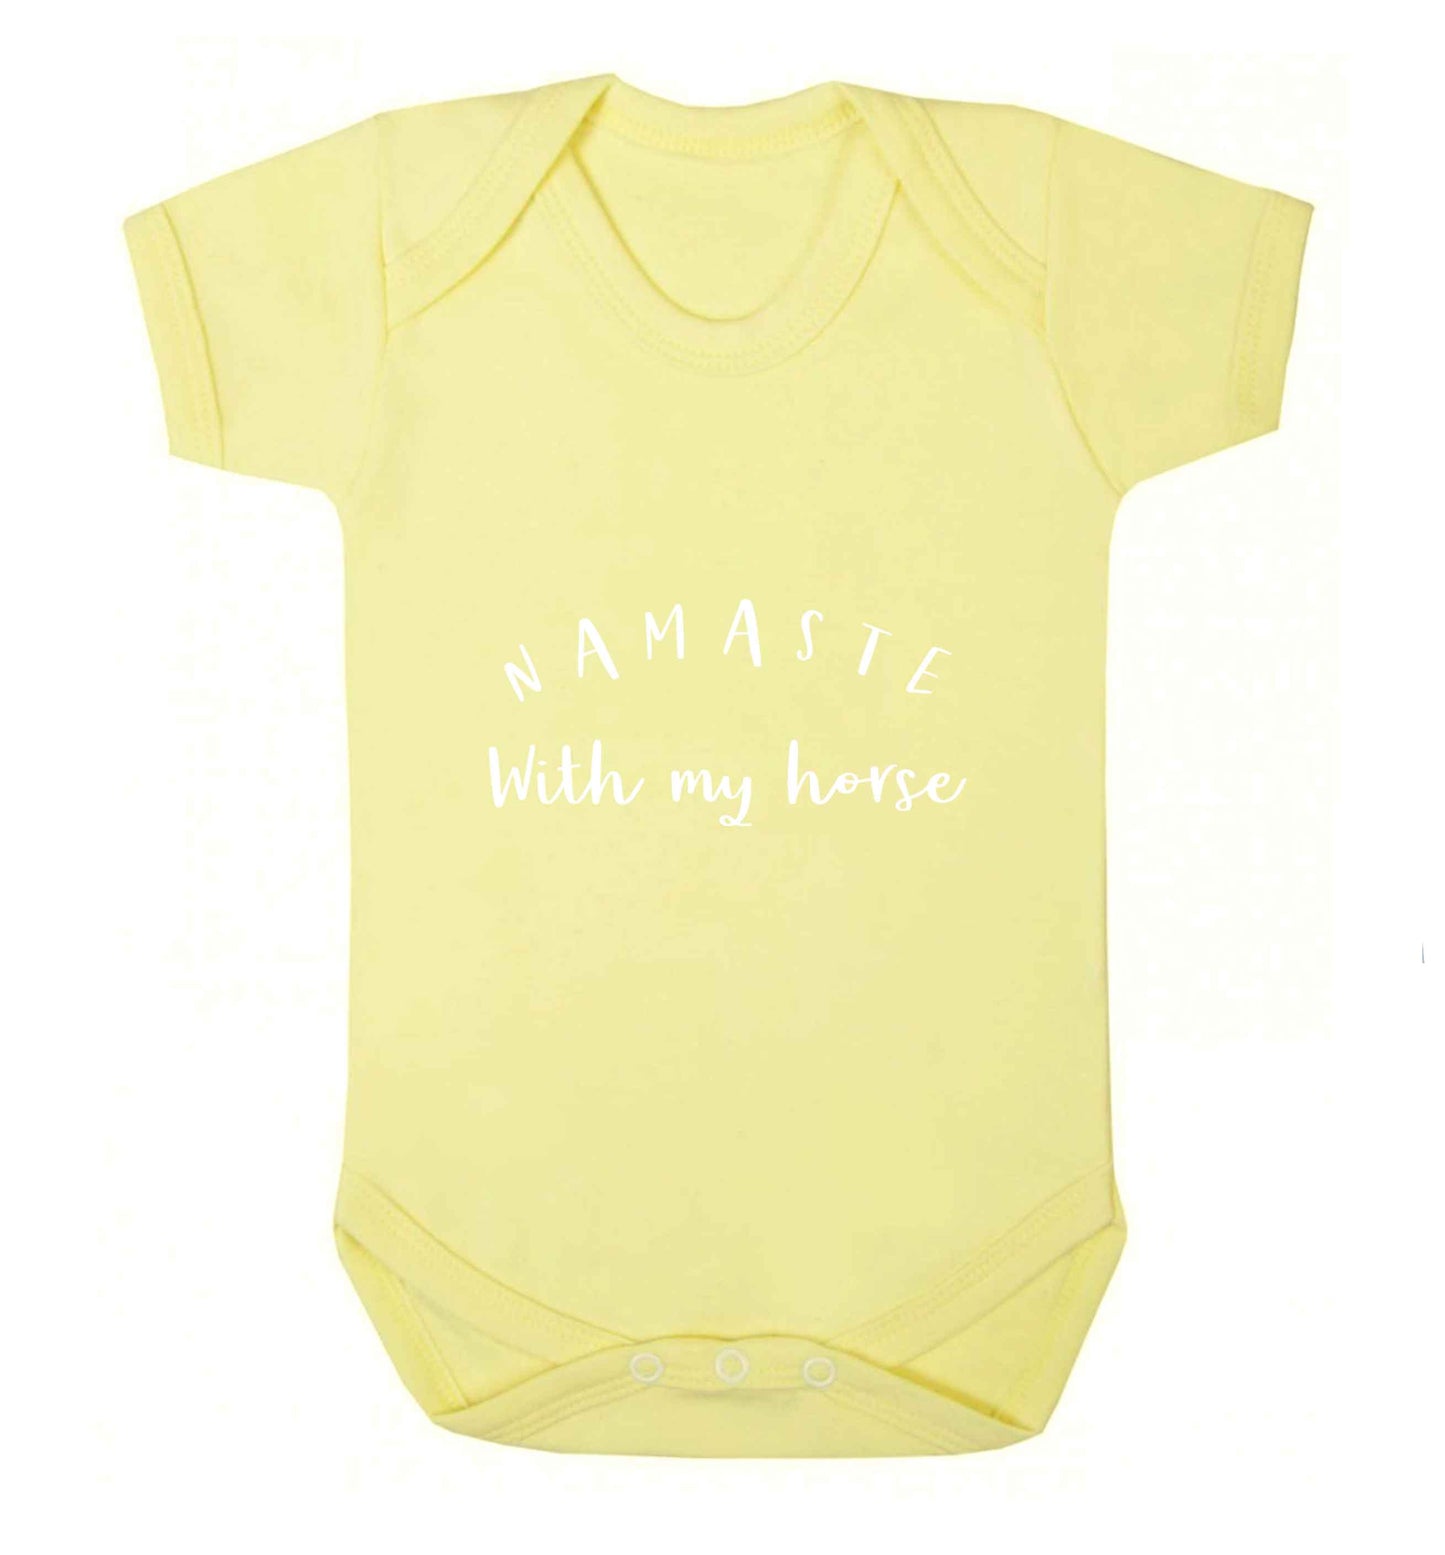 Namaste with my horse baby vest pale yellow 18-24 months